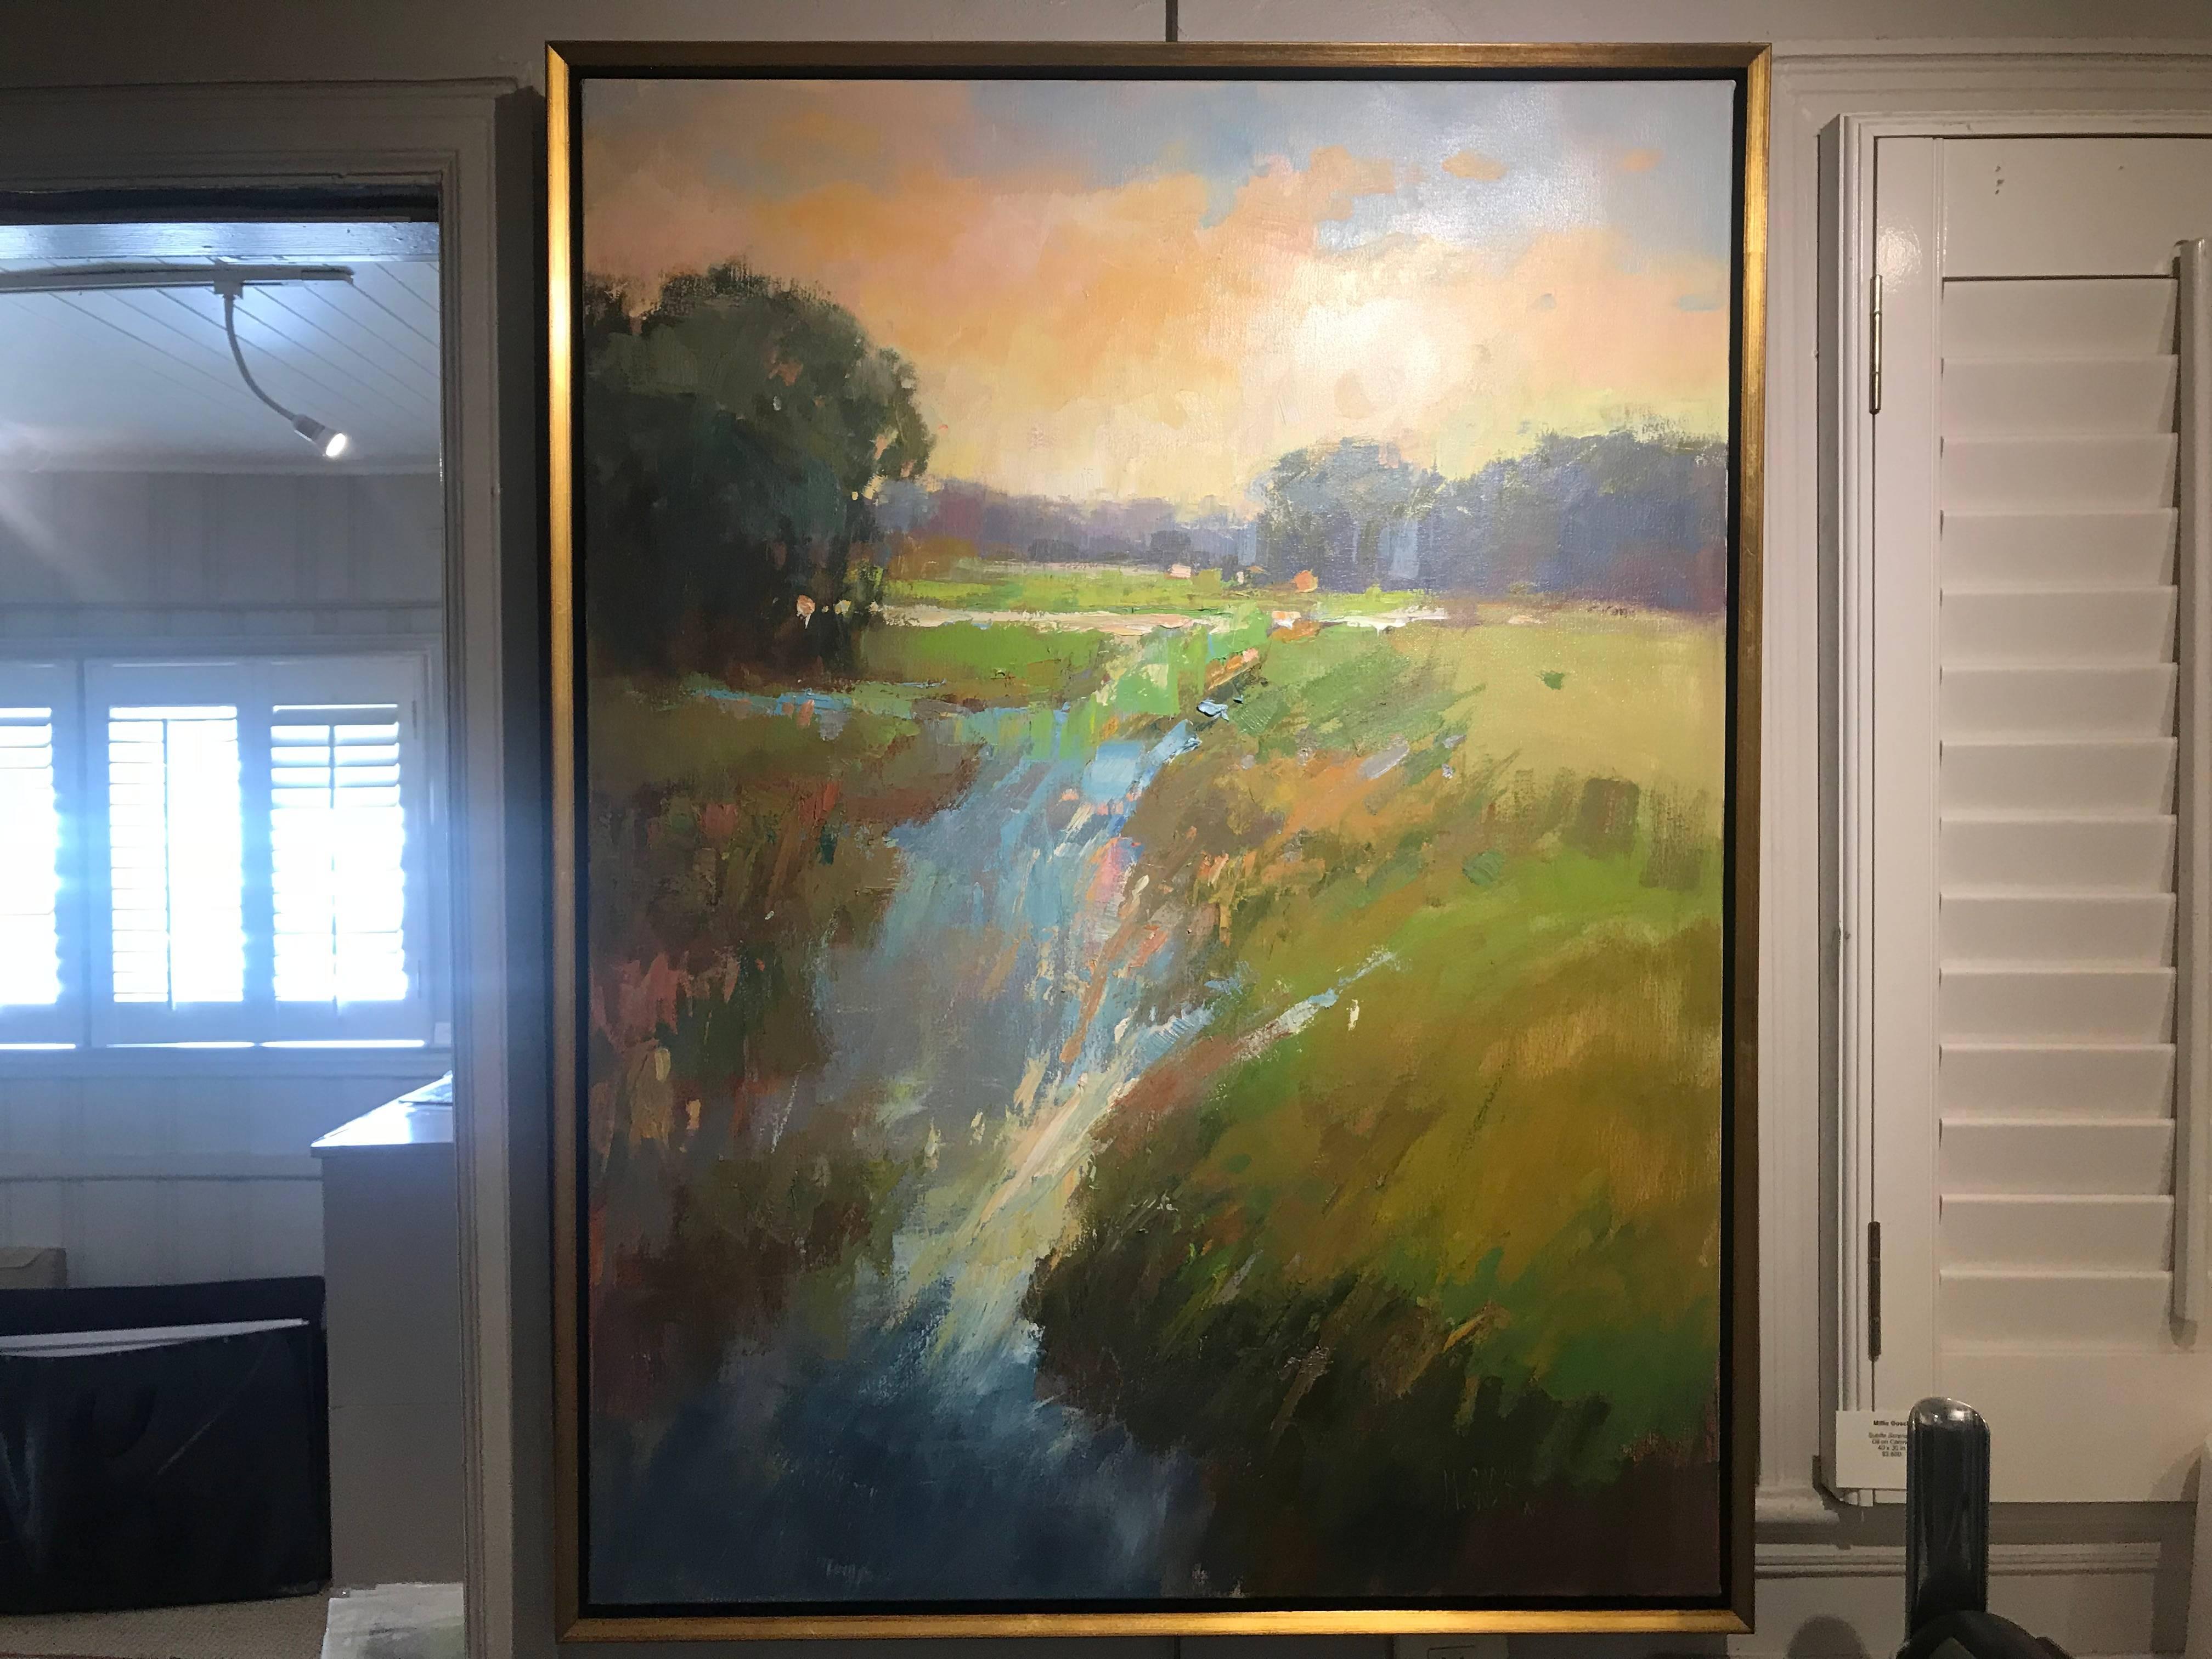 'Subtle Serenade' is a framed Impressionist plein-air landscape painting created by American artist Milly Gosch in 2018. Painted in a vertical format, this oil on canvas piece features a serene view of a meadow, accented by the presence of a few